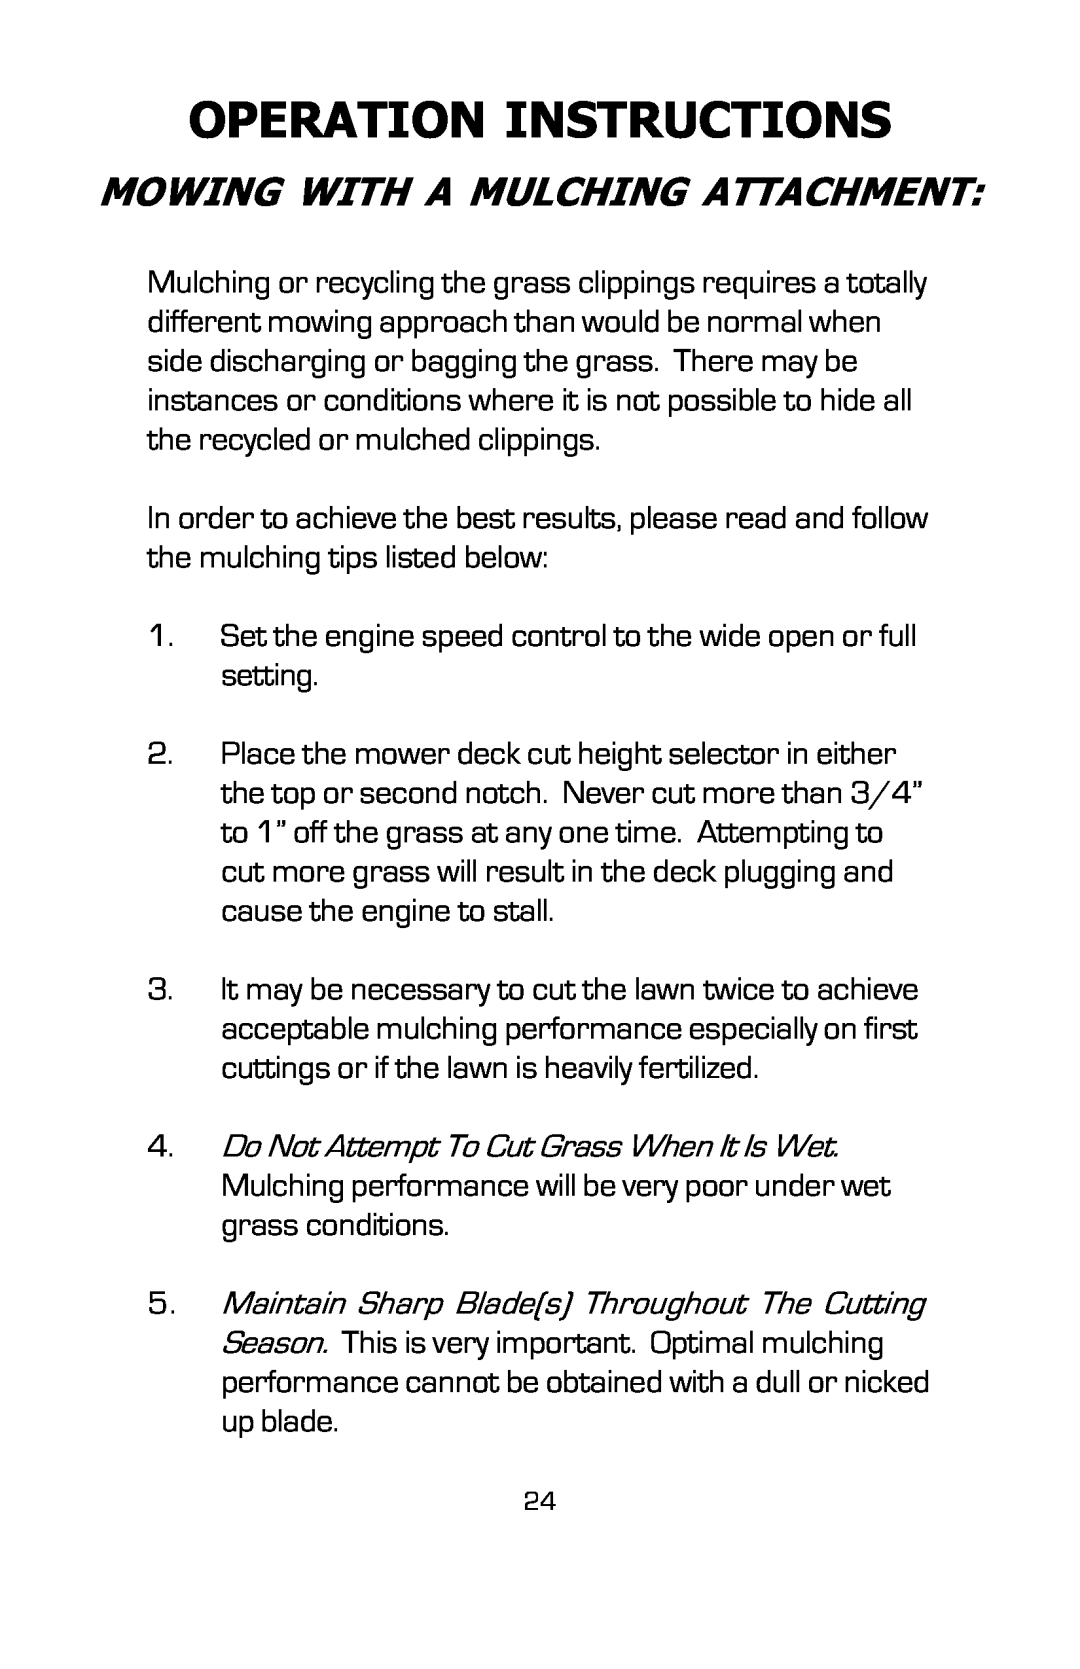 Dixon 16134-0803 manual Operation Instructions, Mowing With A Mulching Attachment 